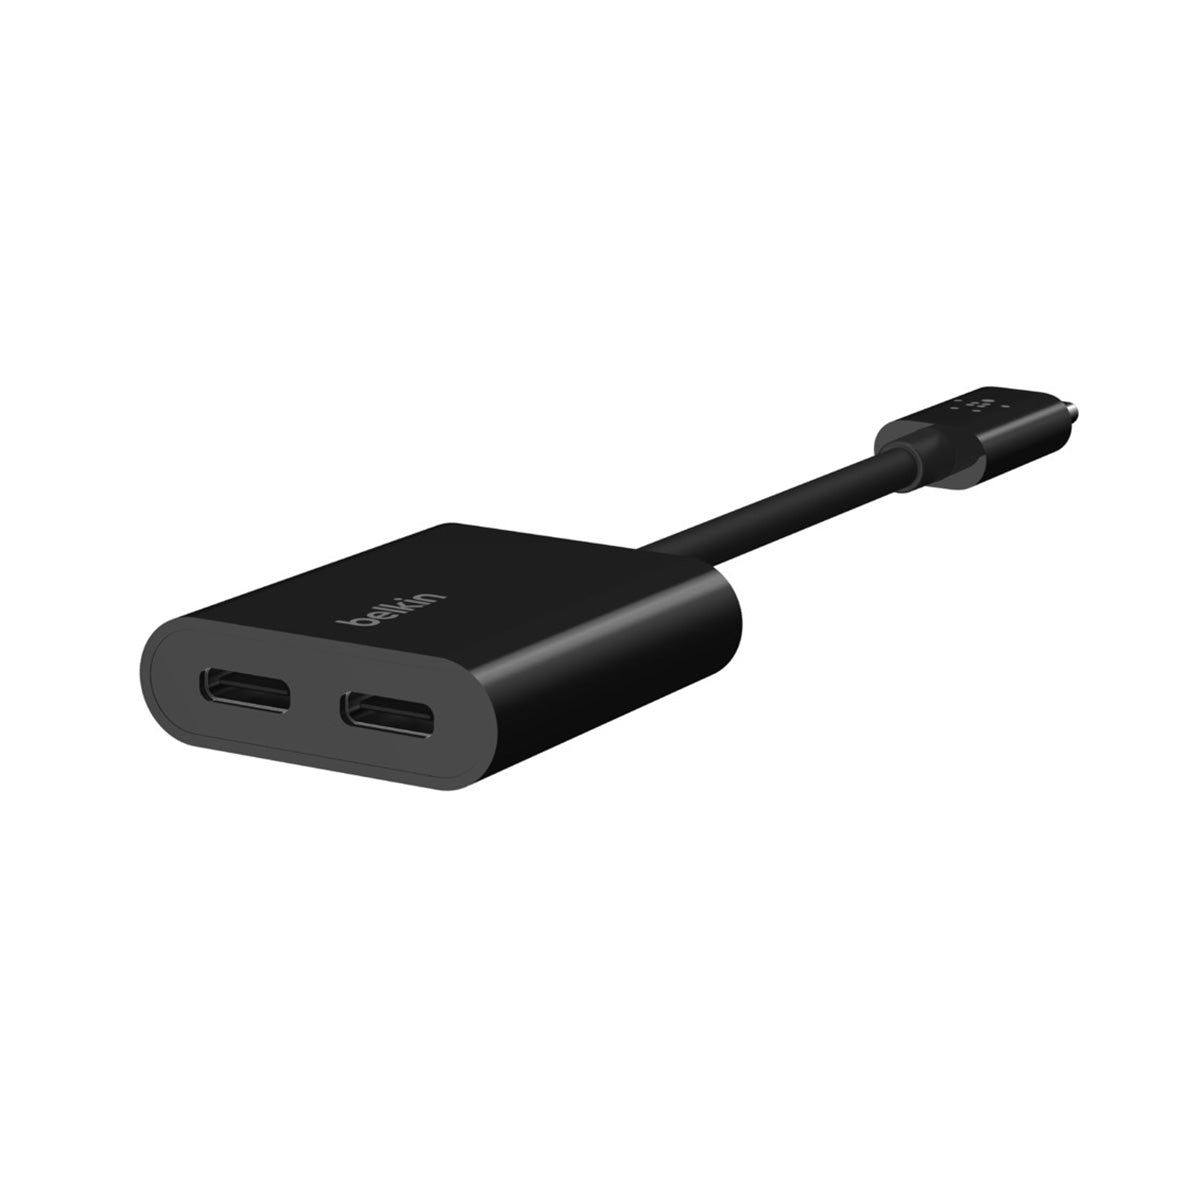 Belkin USB-C Charge Adapter (C-Audio + C-Charge)